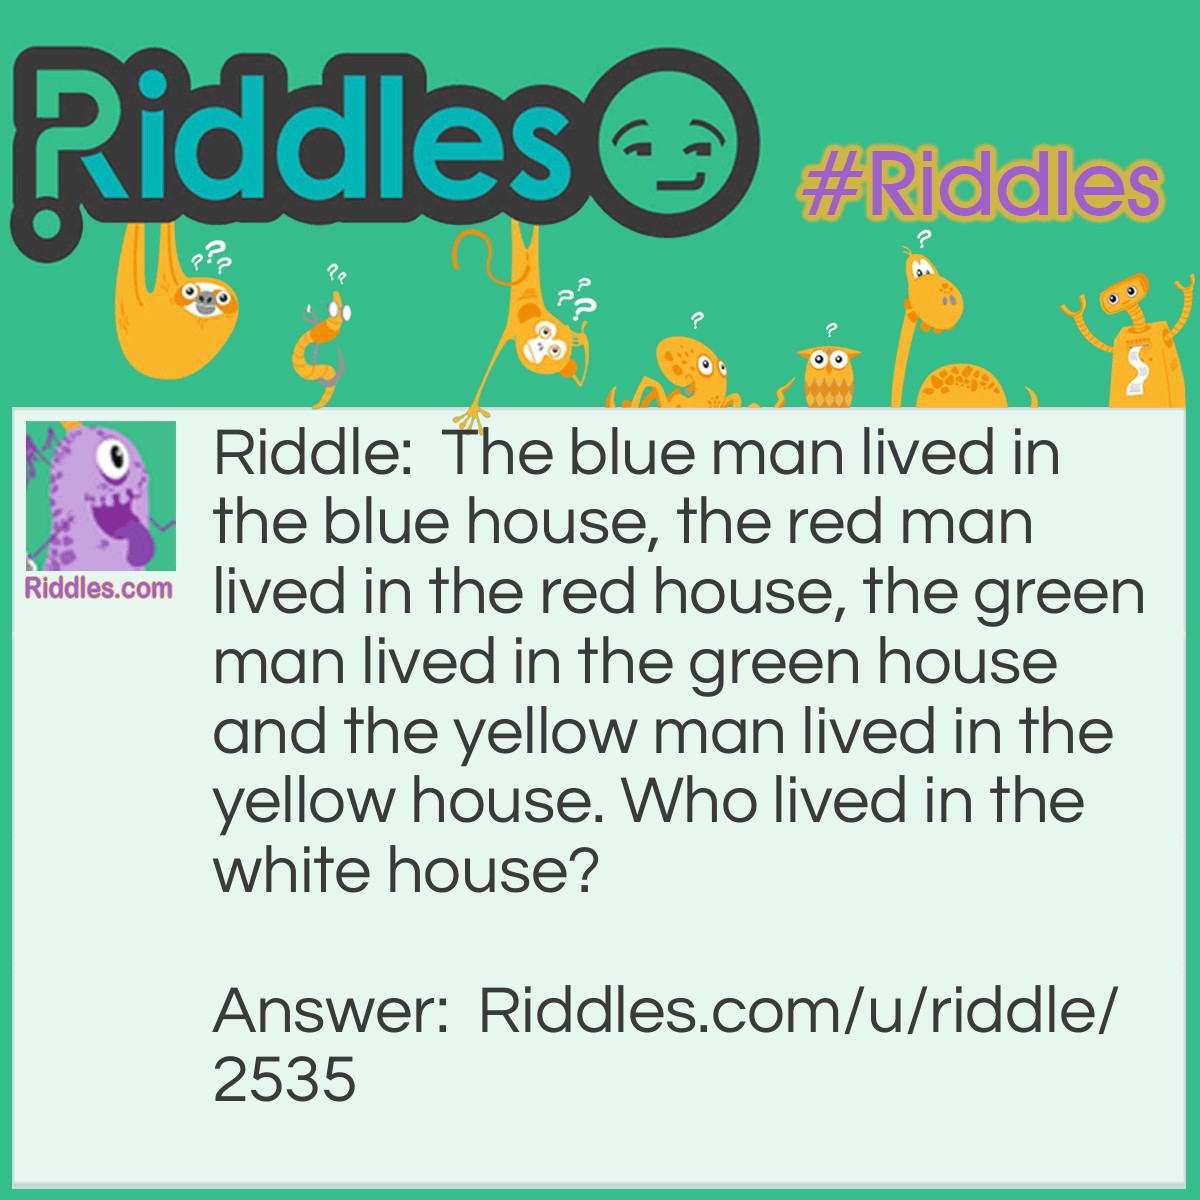 Riddle: The blue man lived in the blue house, the red man lived in the red house, the green man lived in the green house and the yellow man lived in the yellow house. Who lived in the white house? Answer: The president.